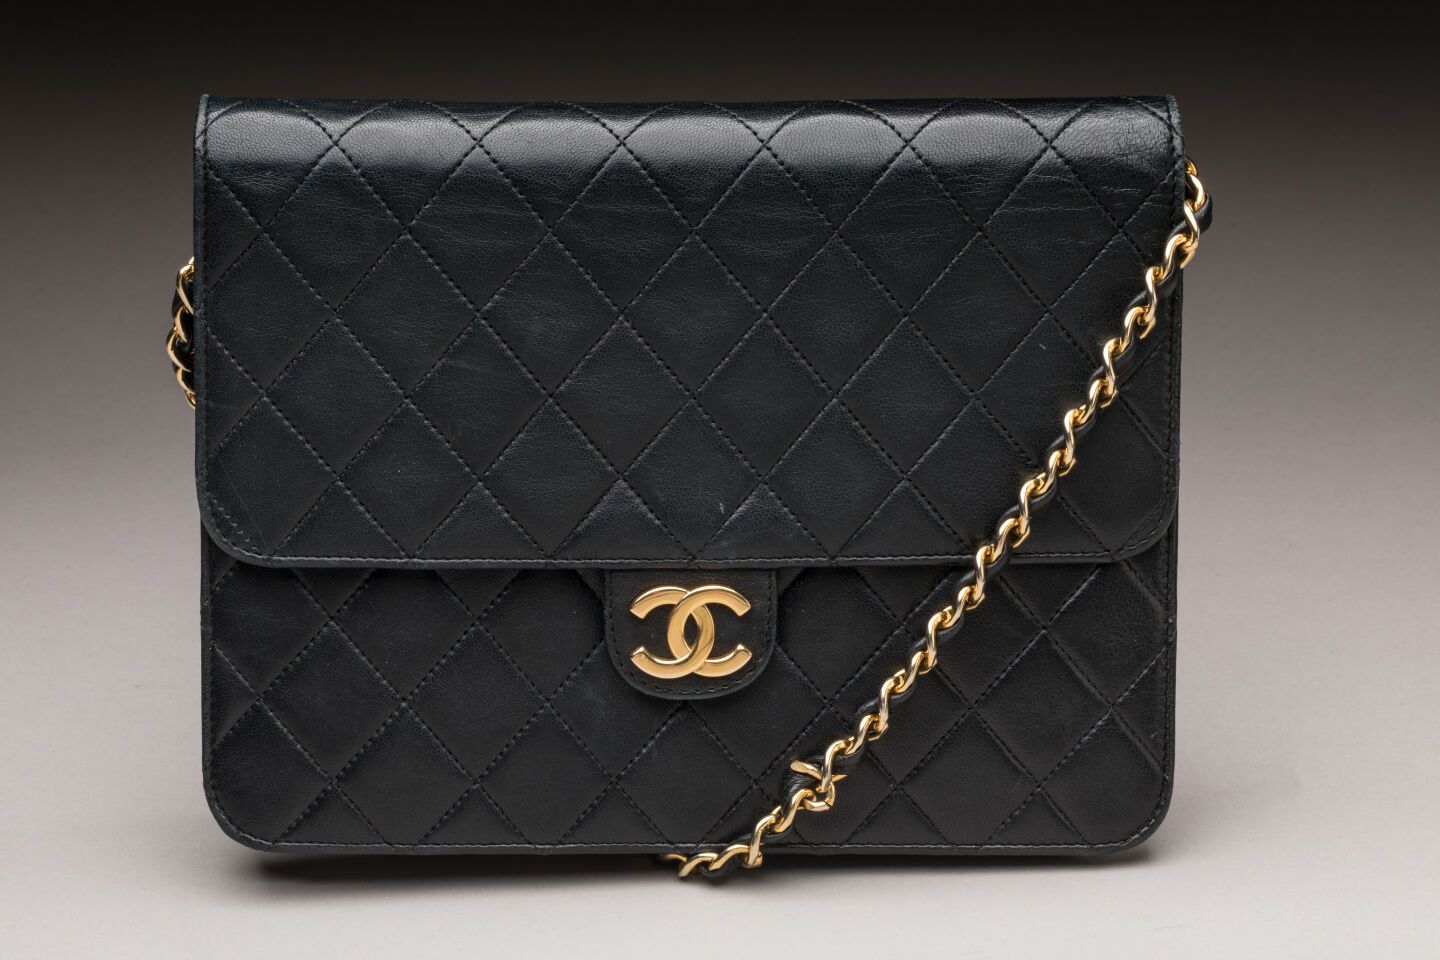 CHANEL - Vintage evening bag model Timeless classic in…